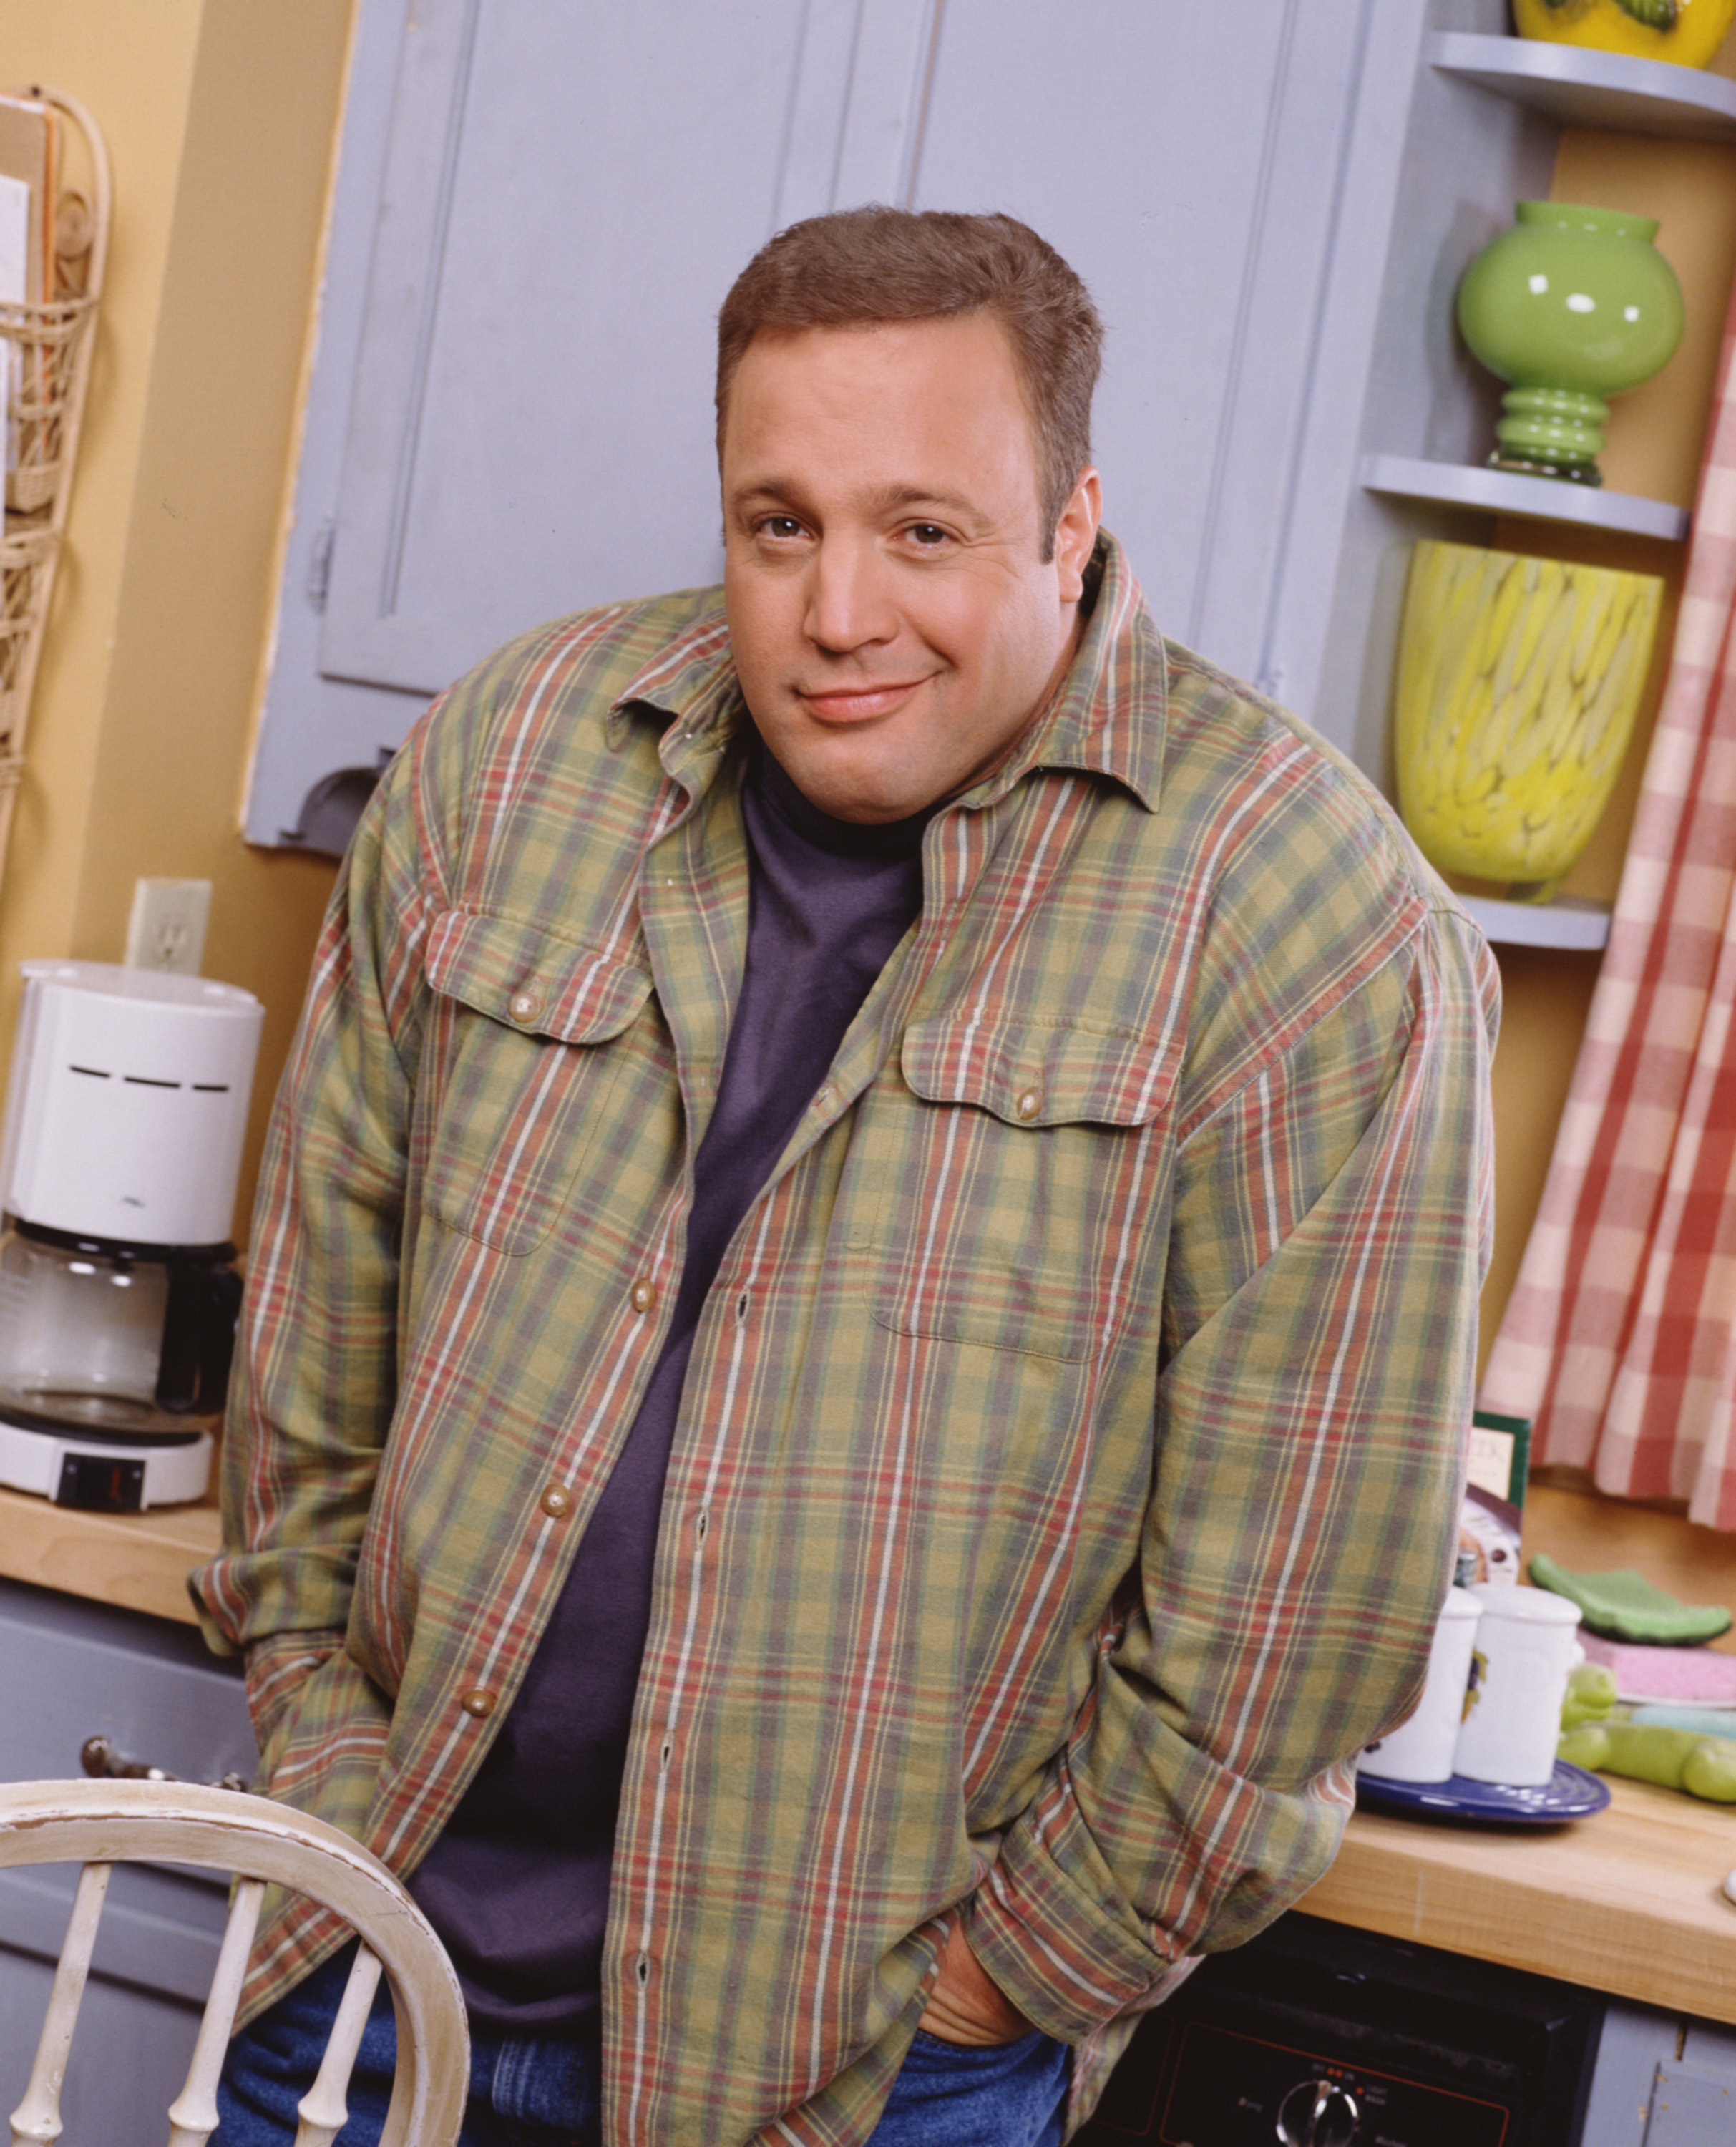 Kevin James as seen in a promotional photo for CBS comedy 'The King of Queens'